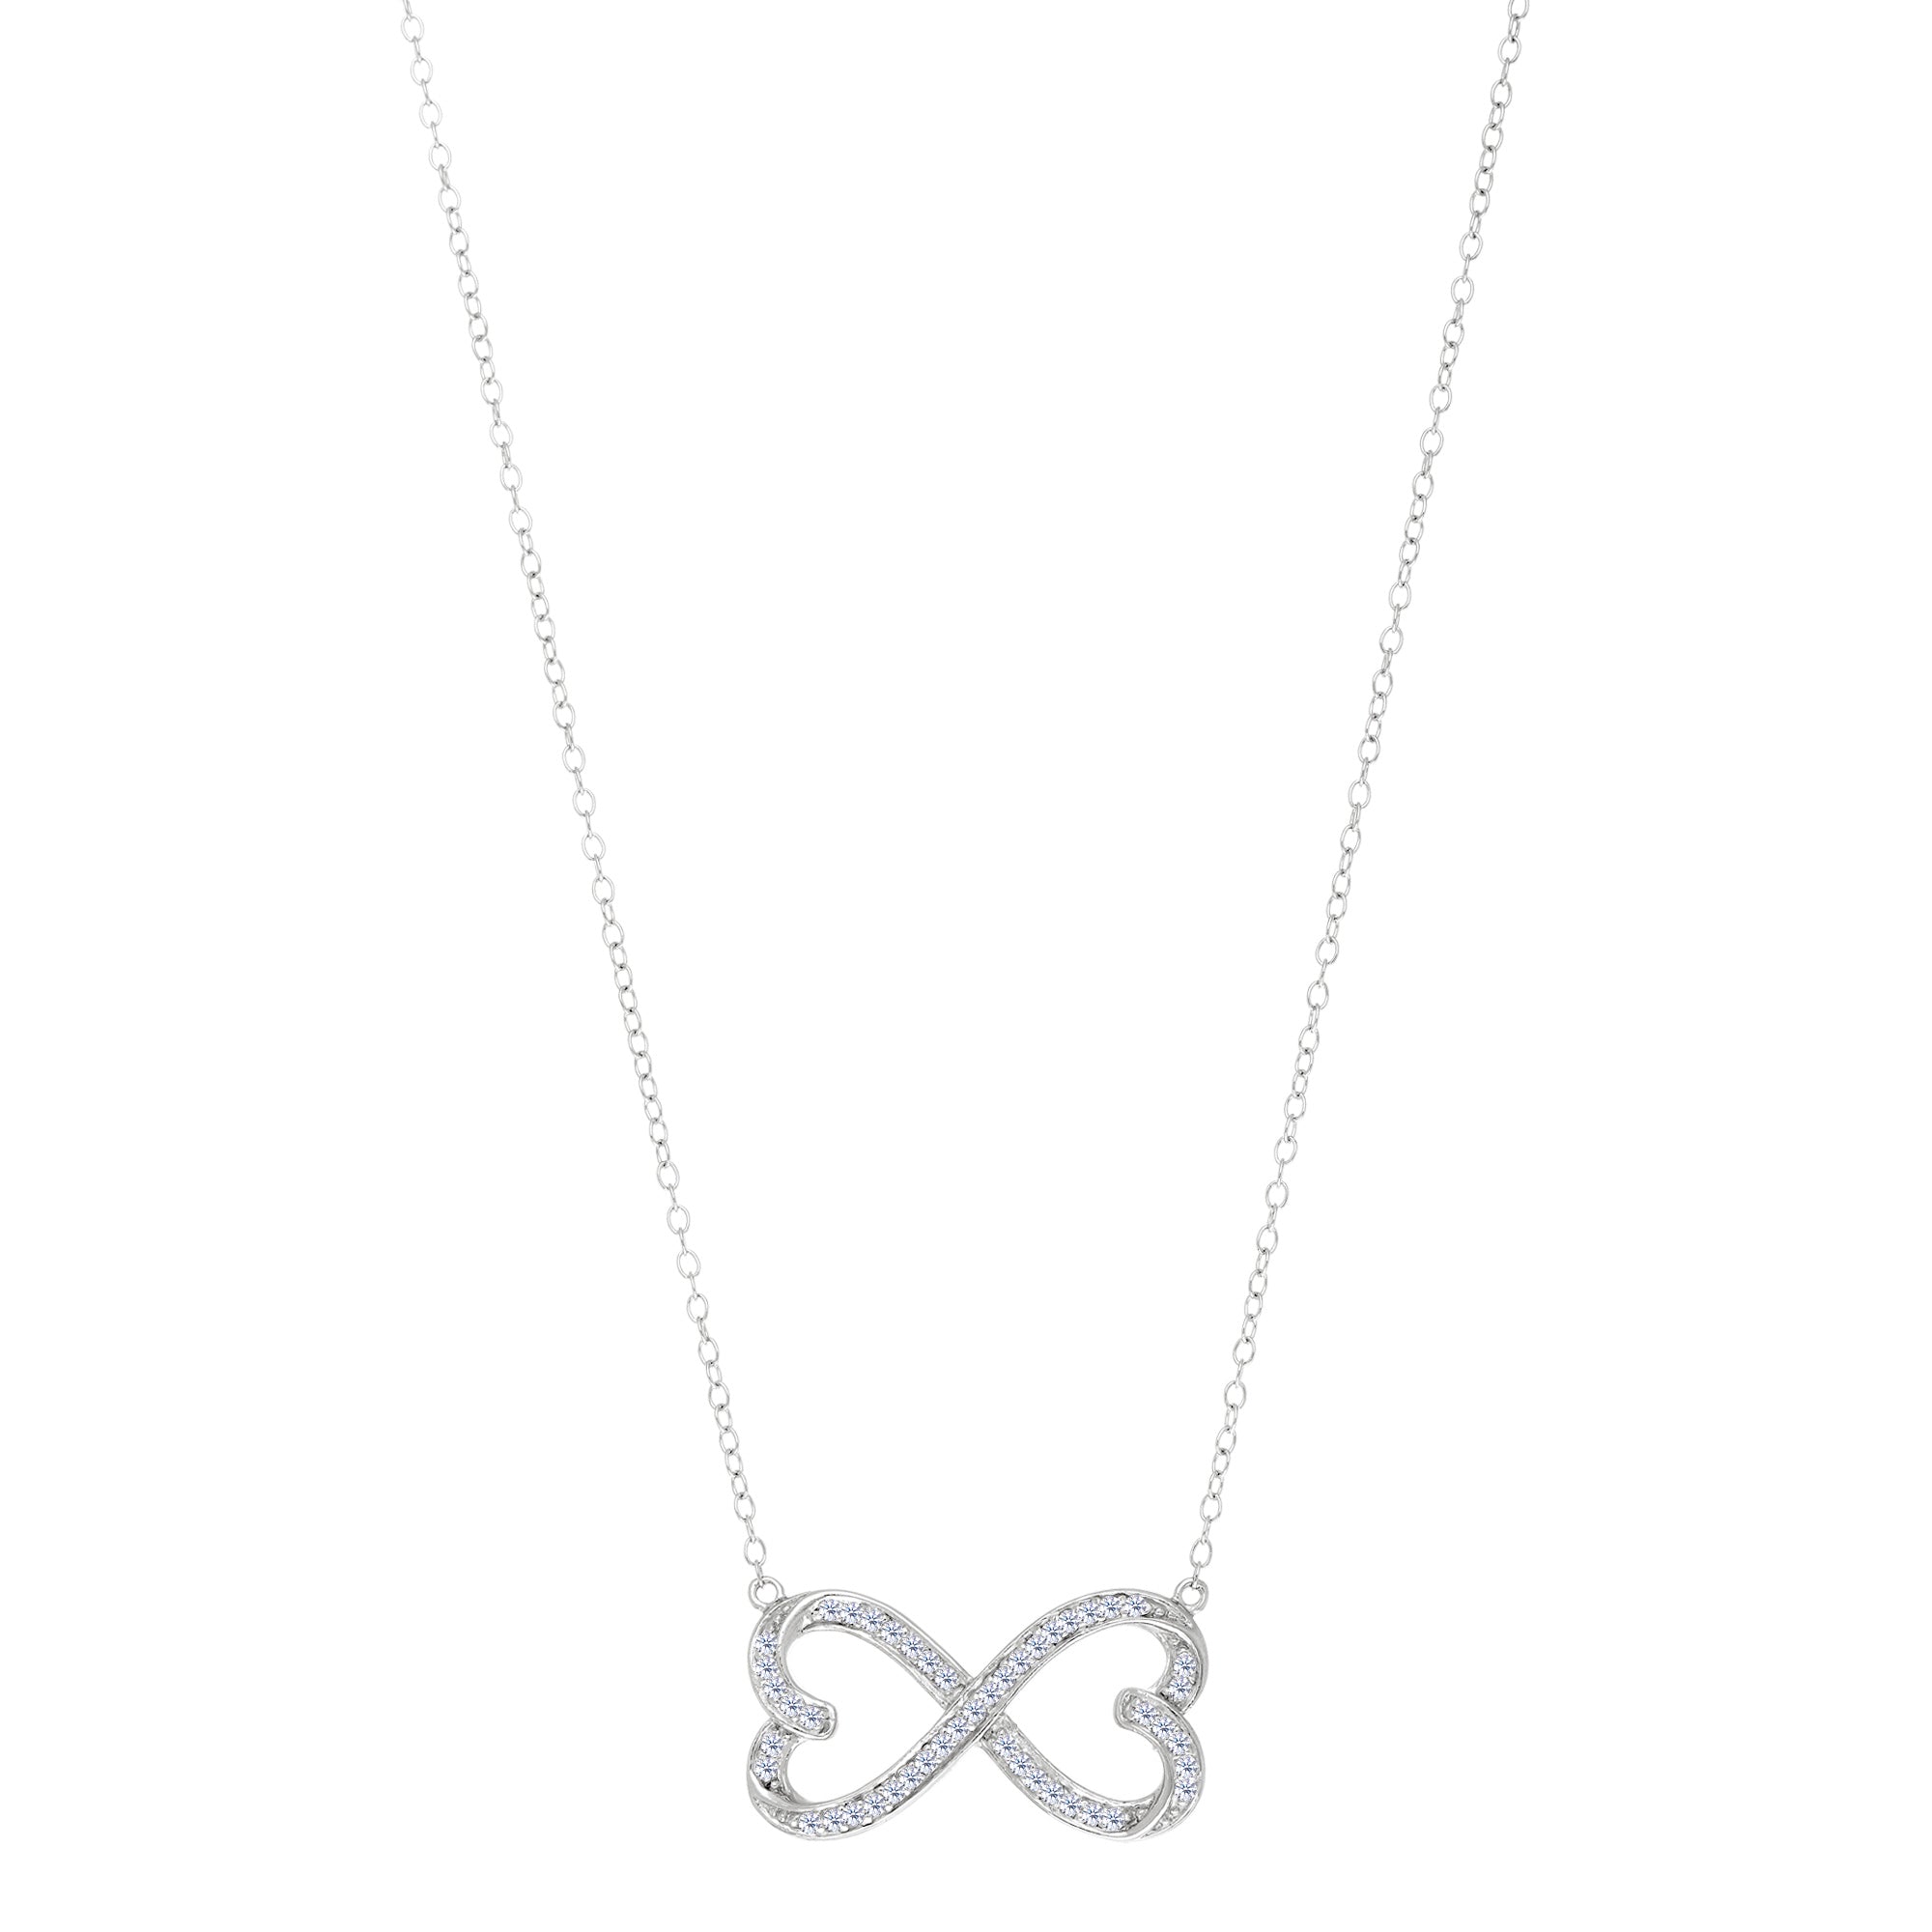 Double Heart Infinity Sign And CZ Necklace In Sterling Silver, 18" fine designer jewelry for men and women